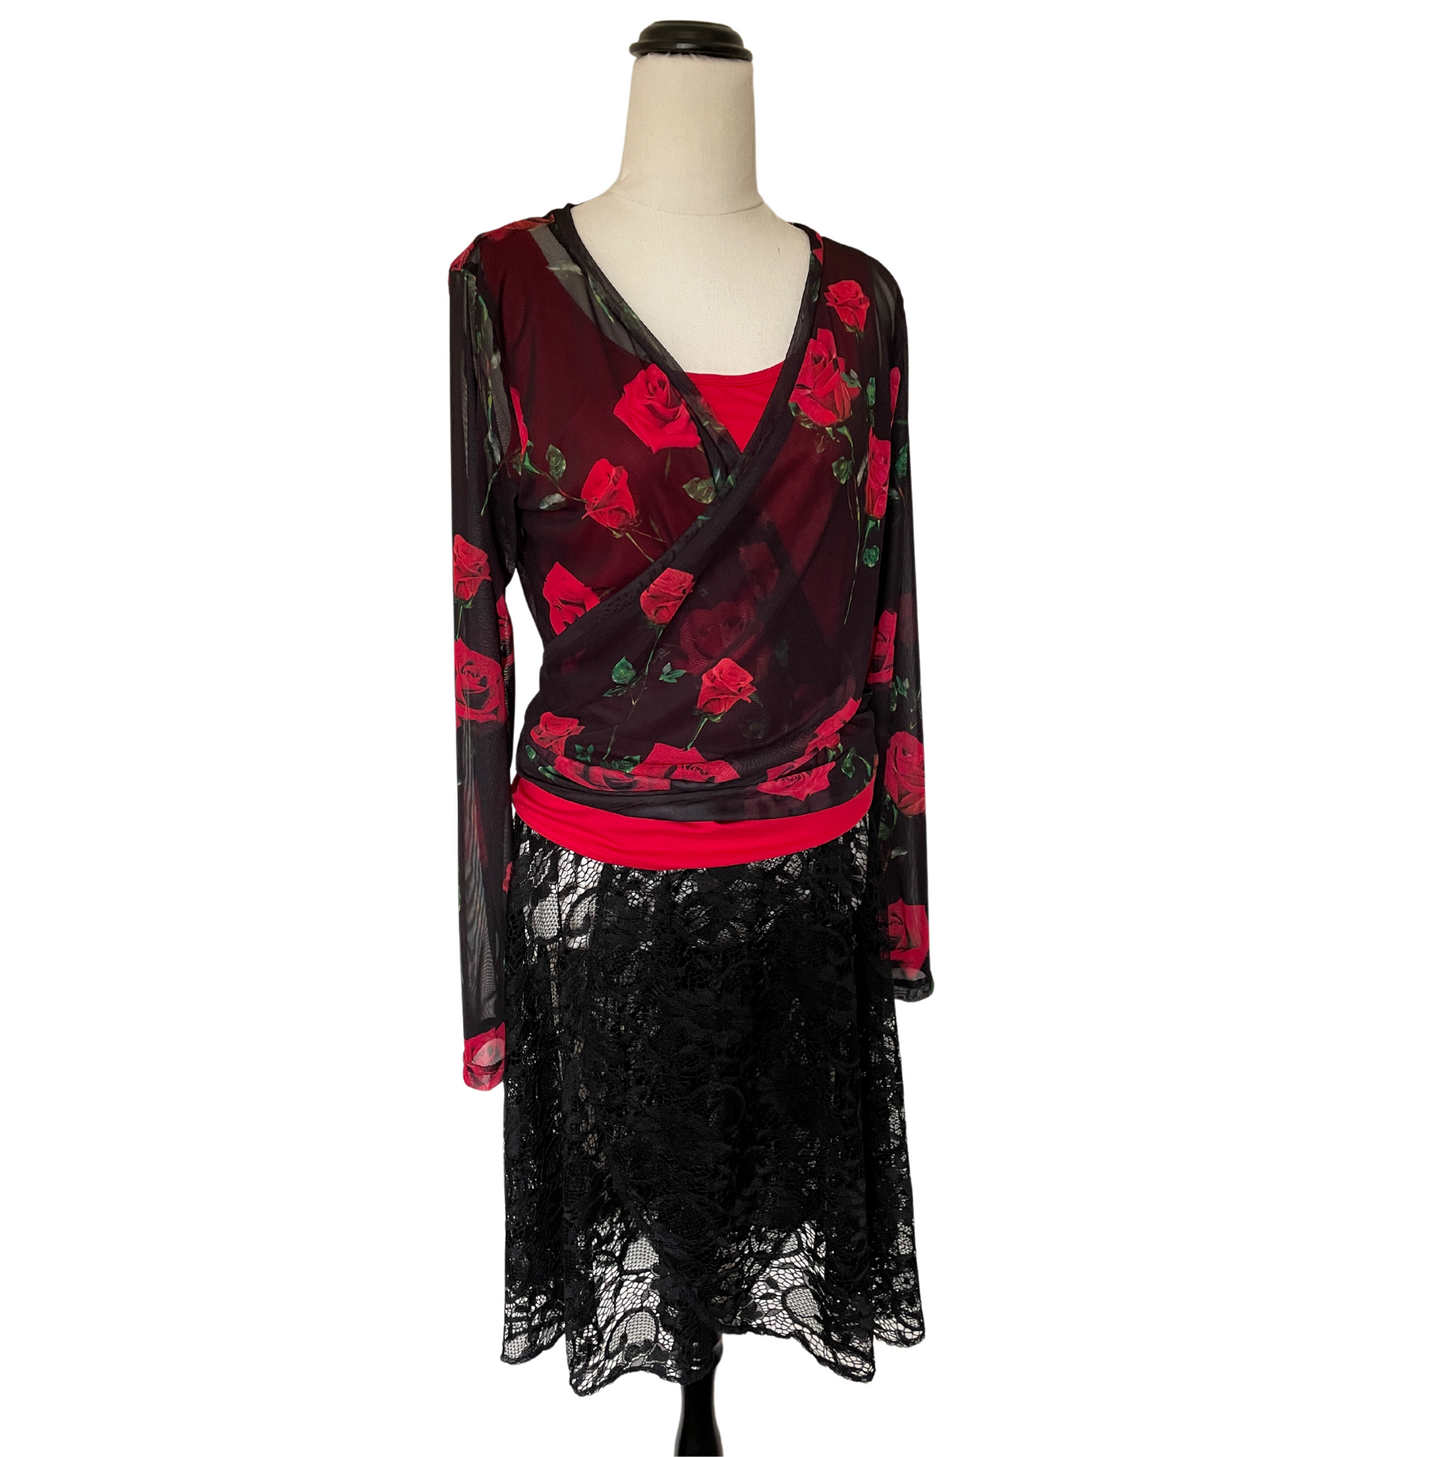 Mesh Stretch Ballerina Wrap Top Red Roses